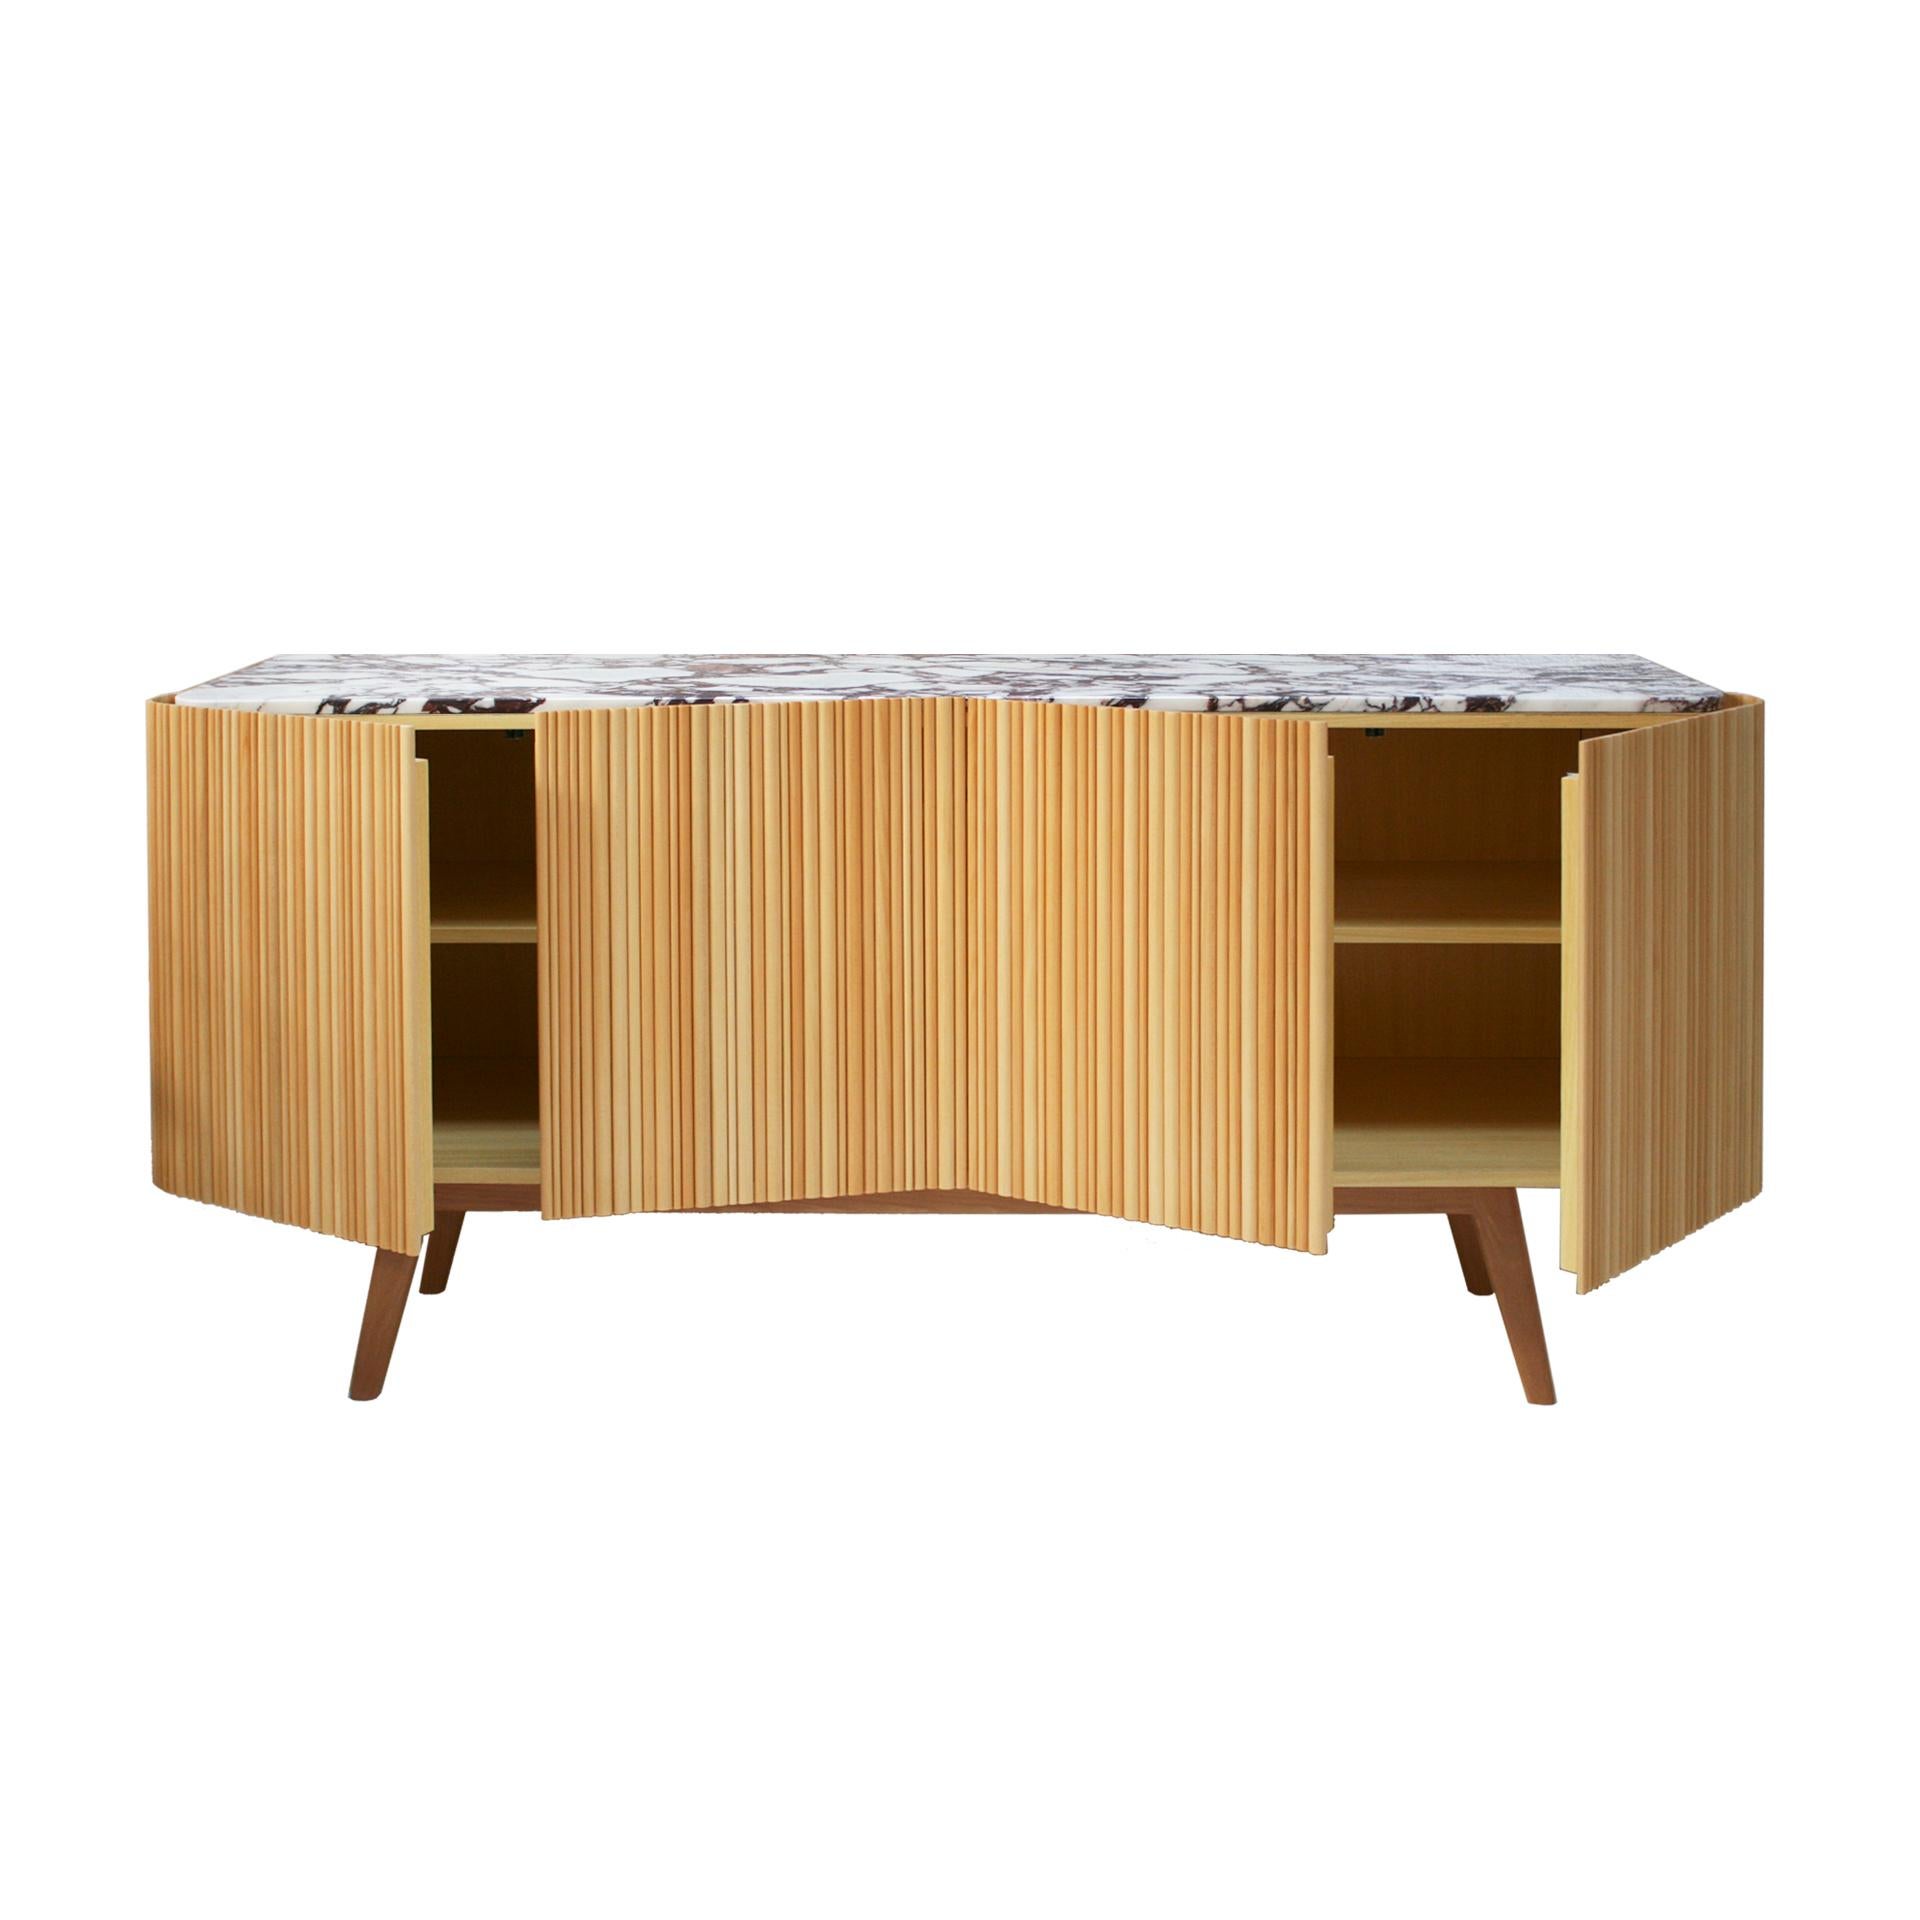 L.A. Studio Contemporary Modern Linden and Lemongrass Wood Sideboard In Good Condition For Sale In Ibiza, Spain